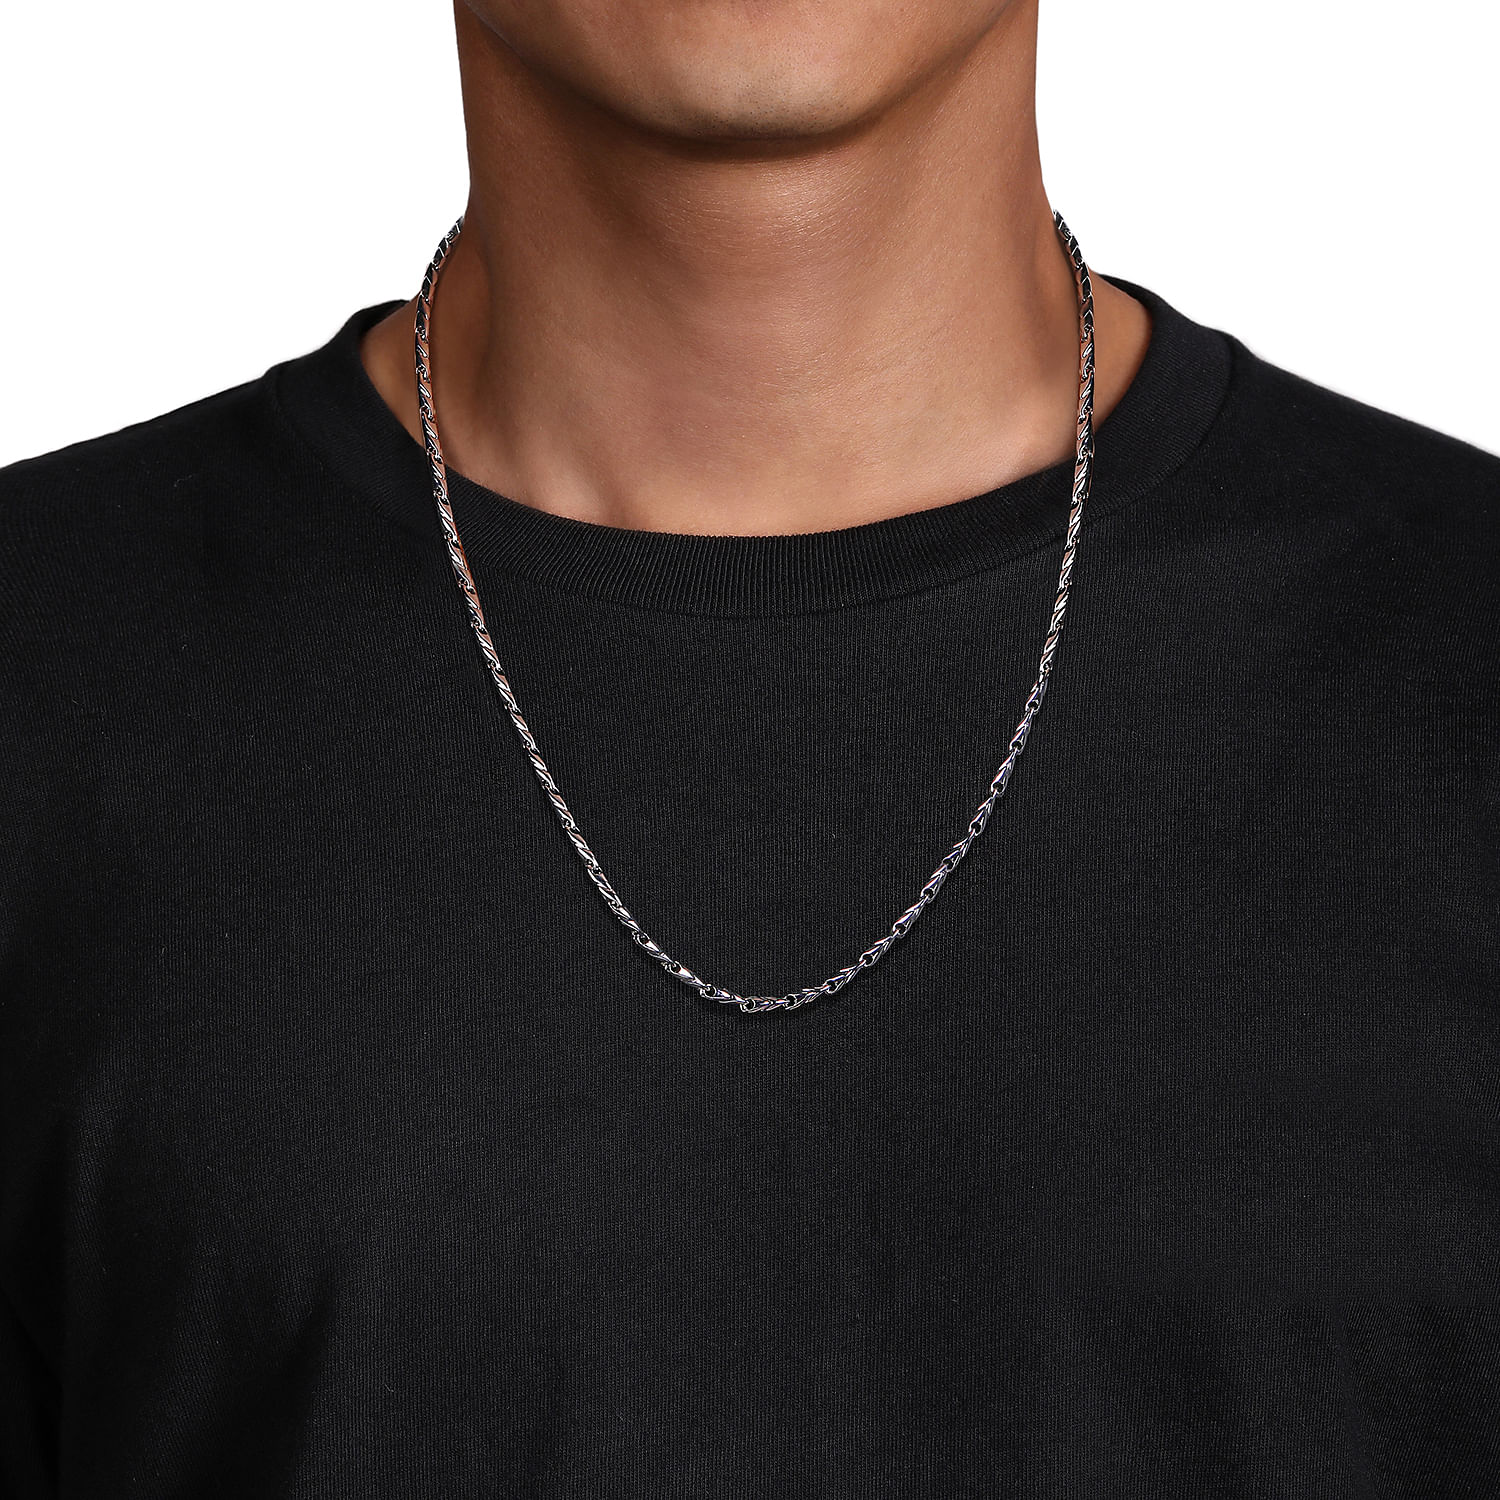 24 Inch 925 Sterling Silver Men's Chain Necklace